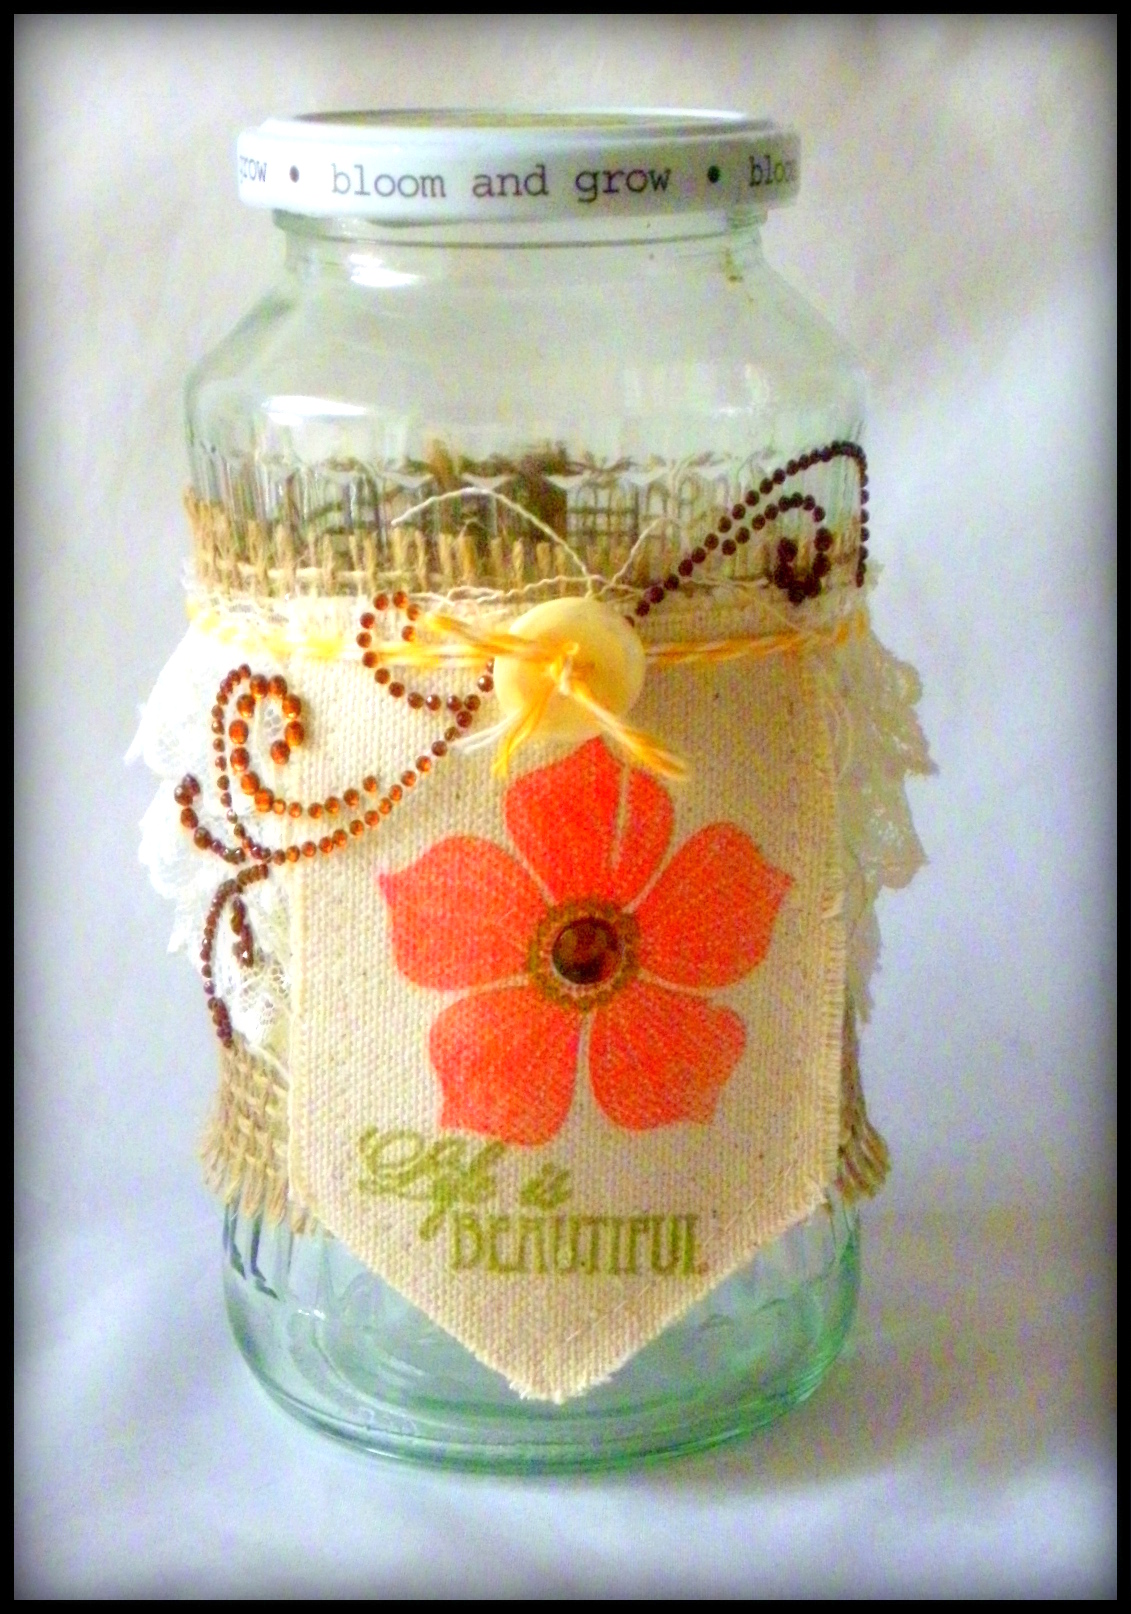 Memento Luxe for an Upcycled Jar with a Fabric Label